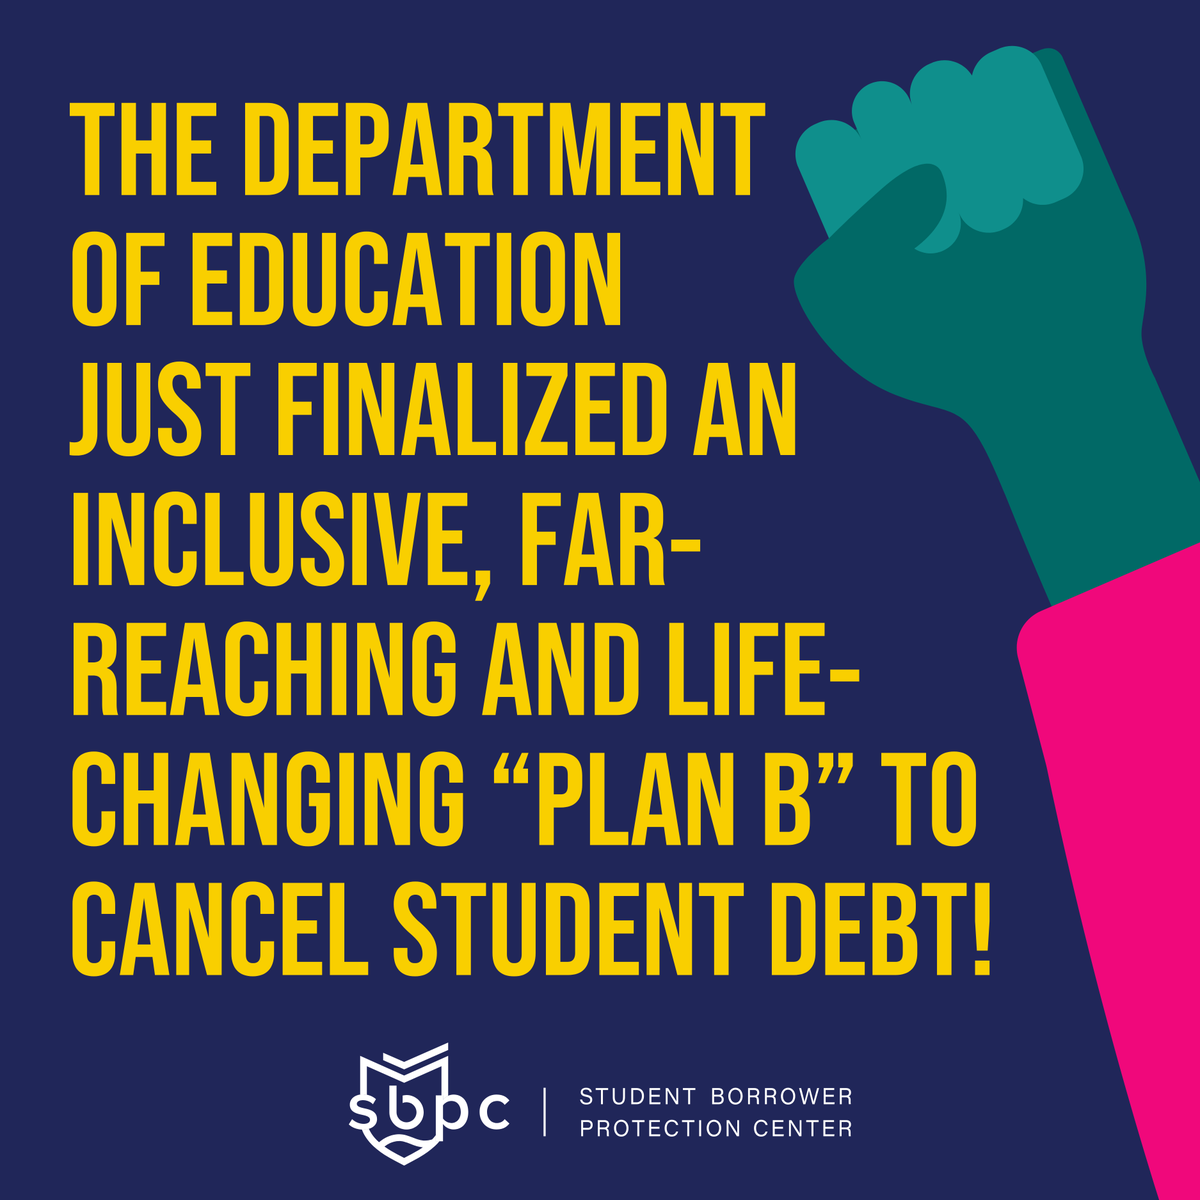 This marks a MASSIVE win for all of the borrowers, advocates, and experts who have been pushing for this since Day 1.  @POTUS and @USEDGOV are delivering on their promise to #CancelStudentDebt and #ProtectBorrowers. Let’s GOOOO!!!